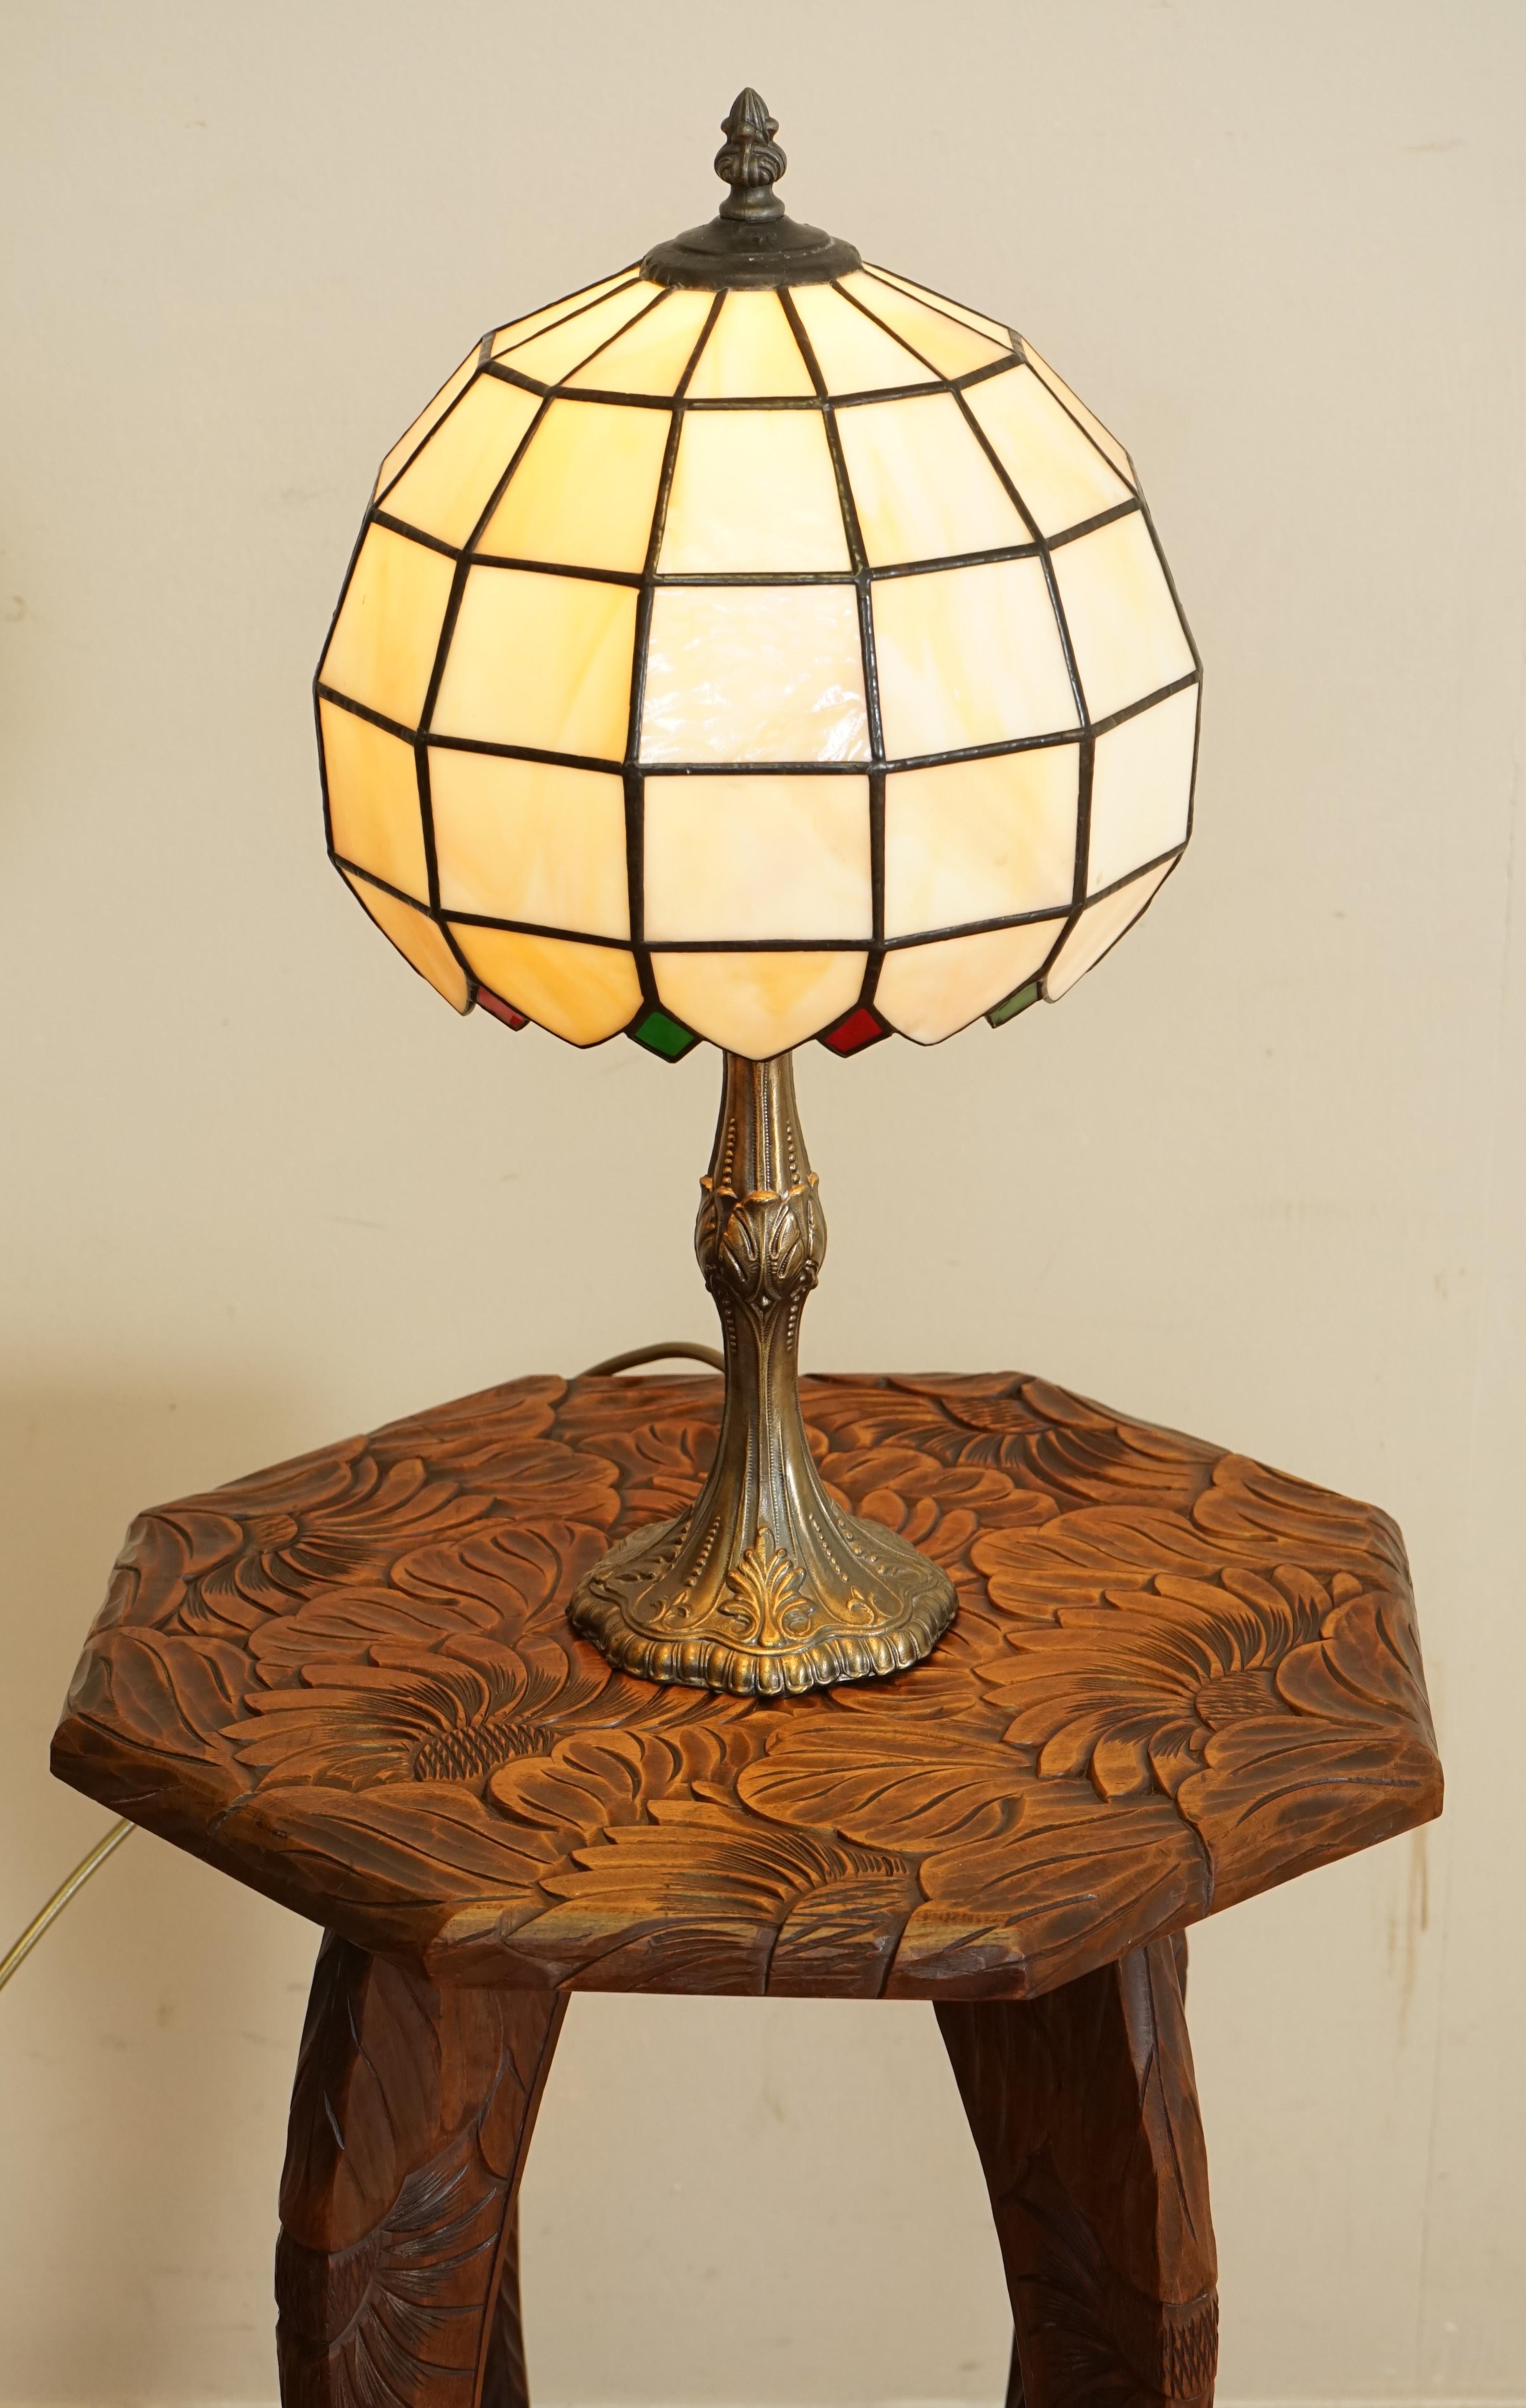 We are so excited to present to you this Lovely Vintage Tiffany & Co Style Lamp. 

Please note that the lamp doesn't come with the bulb.

We have lightly restored this by giving it a hand clean all over.

Please carefully look at the pictures